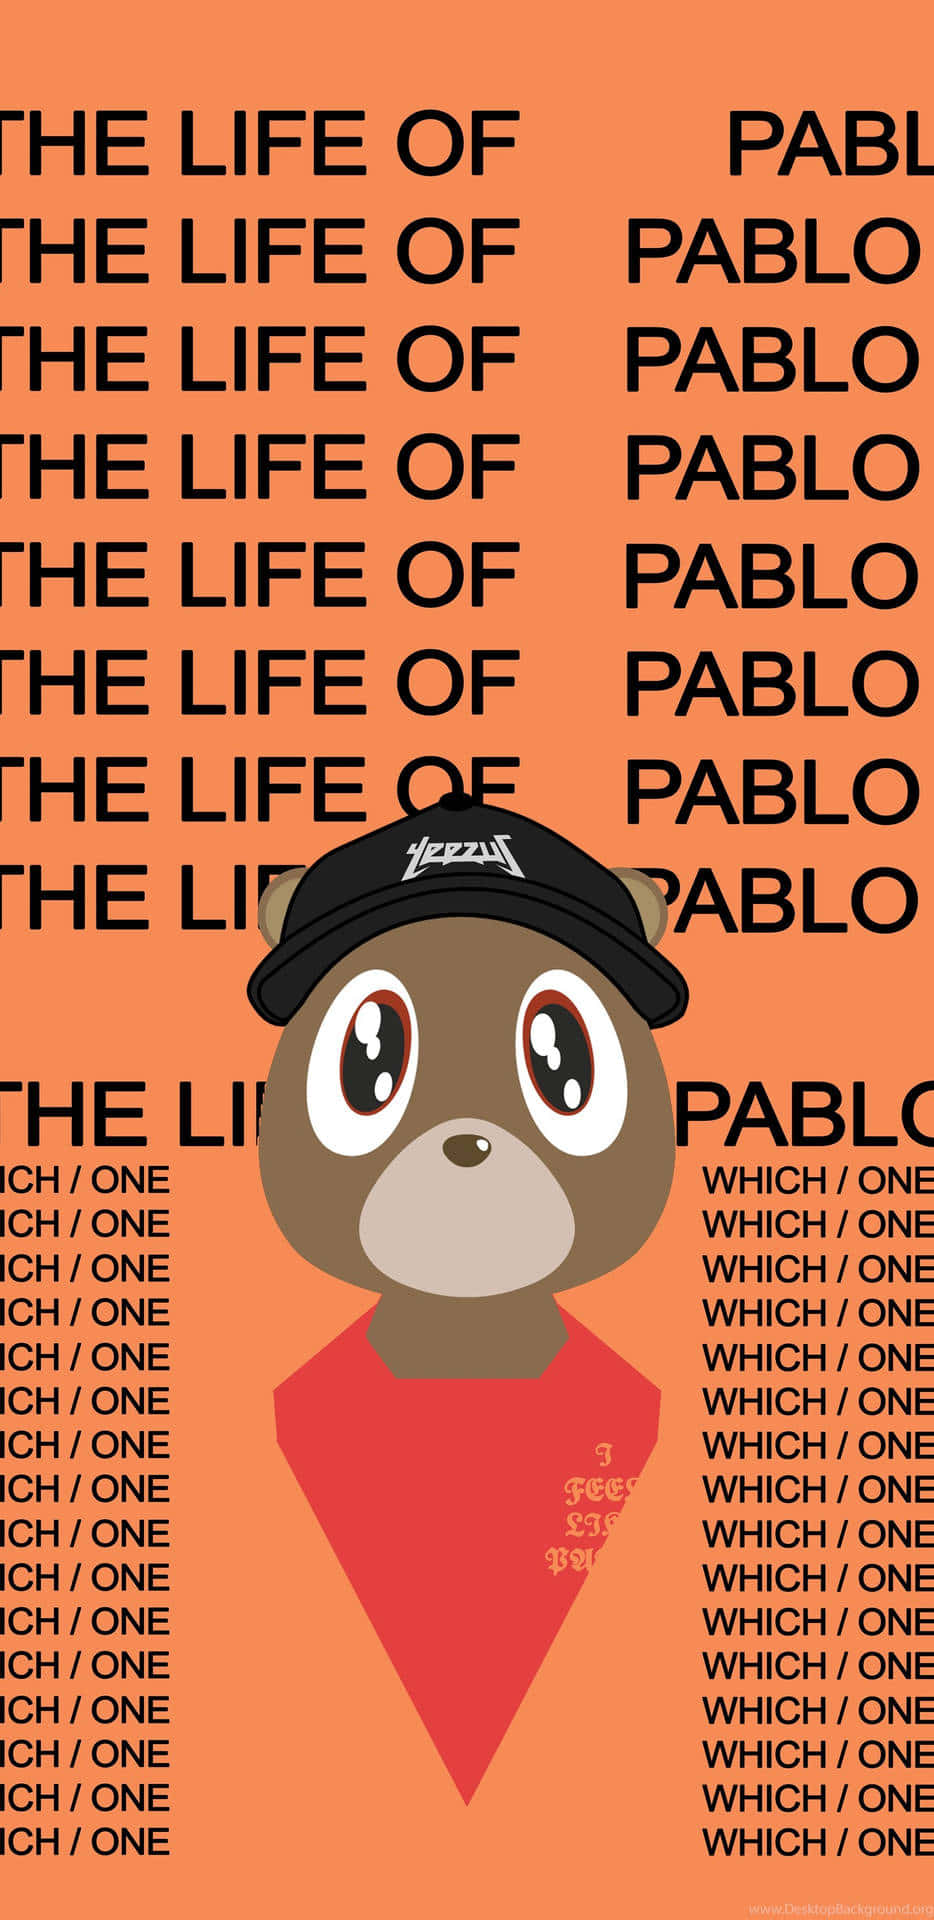 "The Life of Pablo" album cover, designed by Kanye West Wallpaper